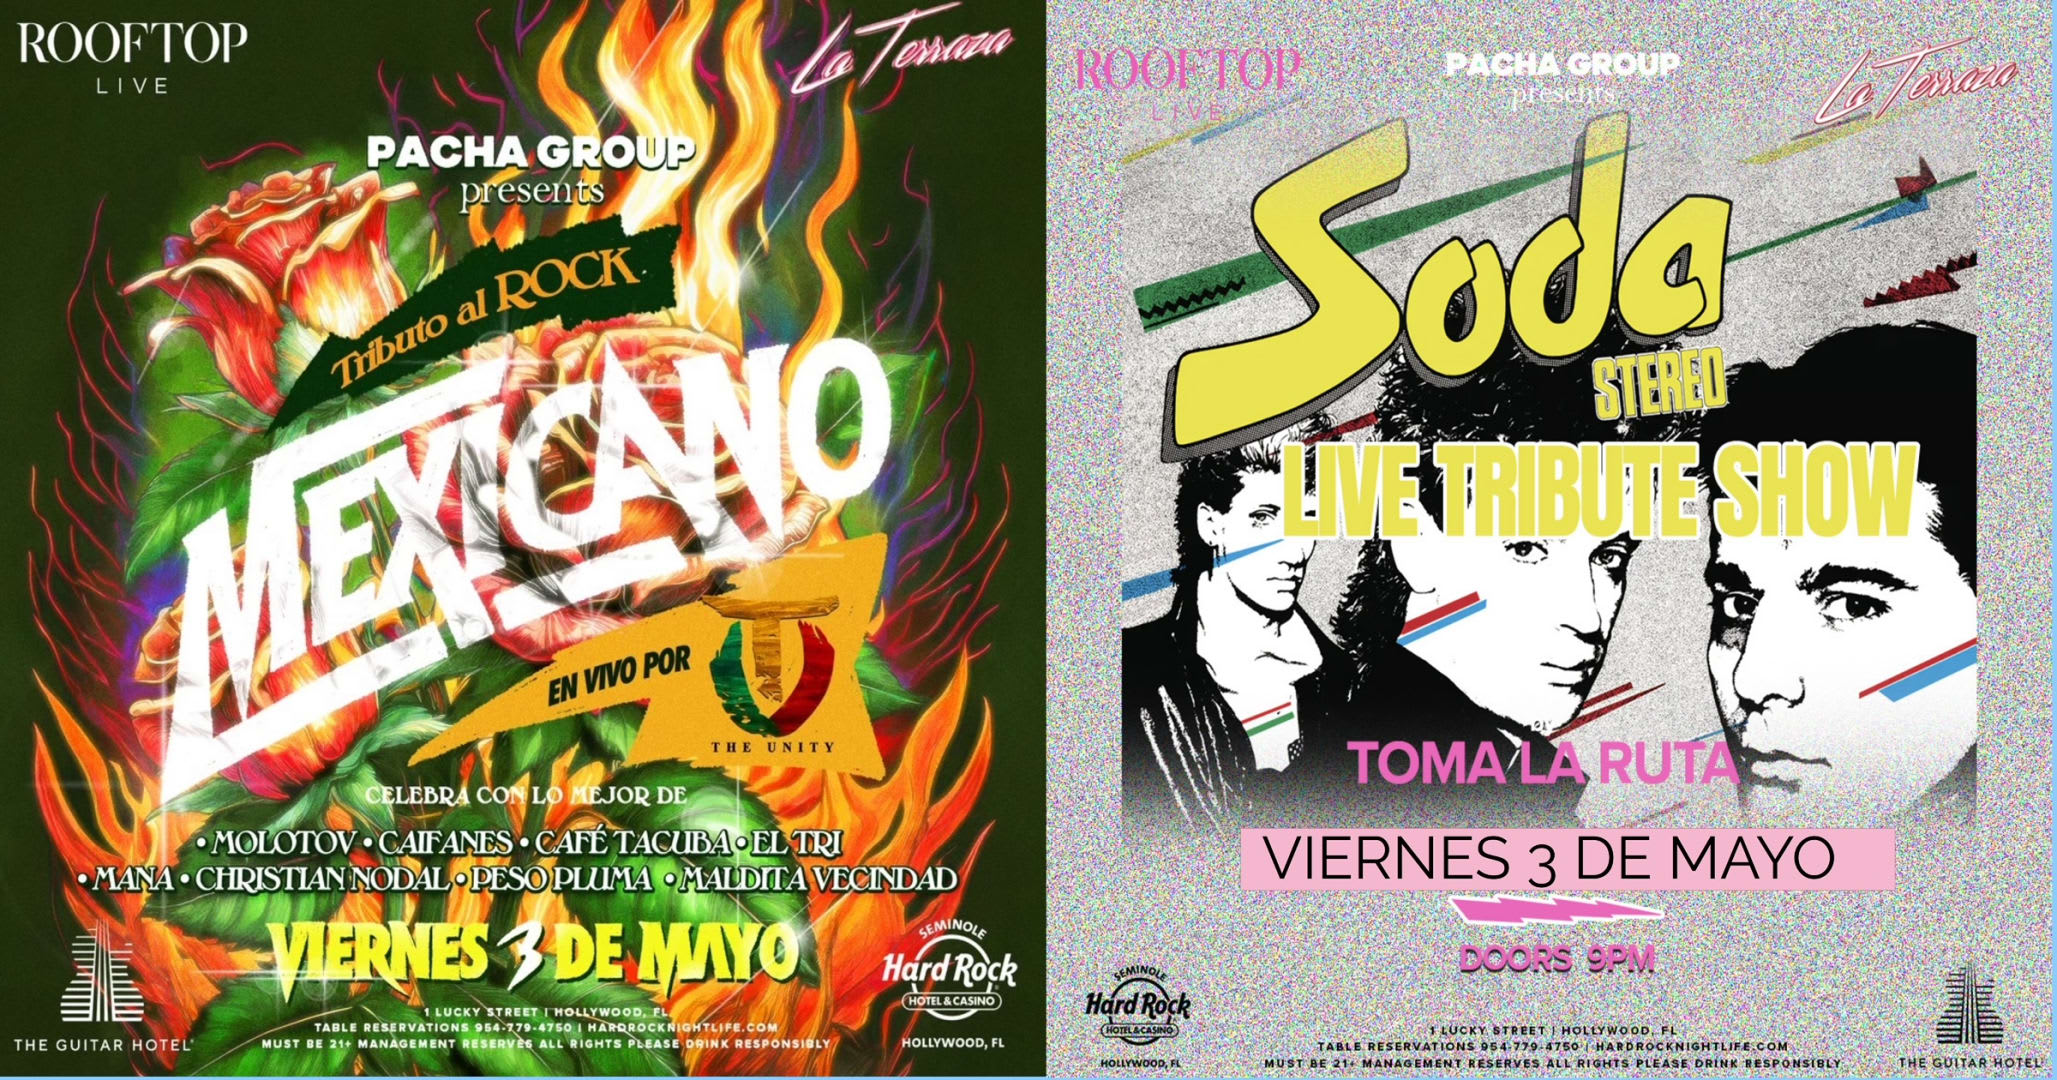 Event - TRIBUTO AL ROCK MEXICANO! Y TRIBUTO A SODA STEREO  Friday MAY 3rd @ ROOFTOP LIVE HARDROCK